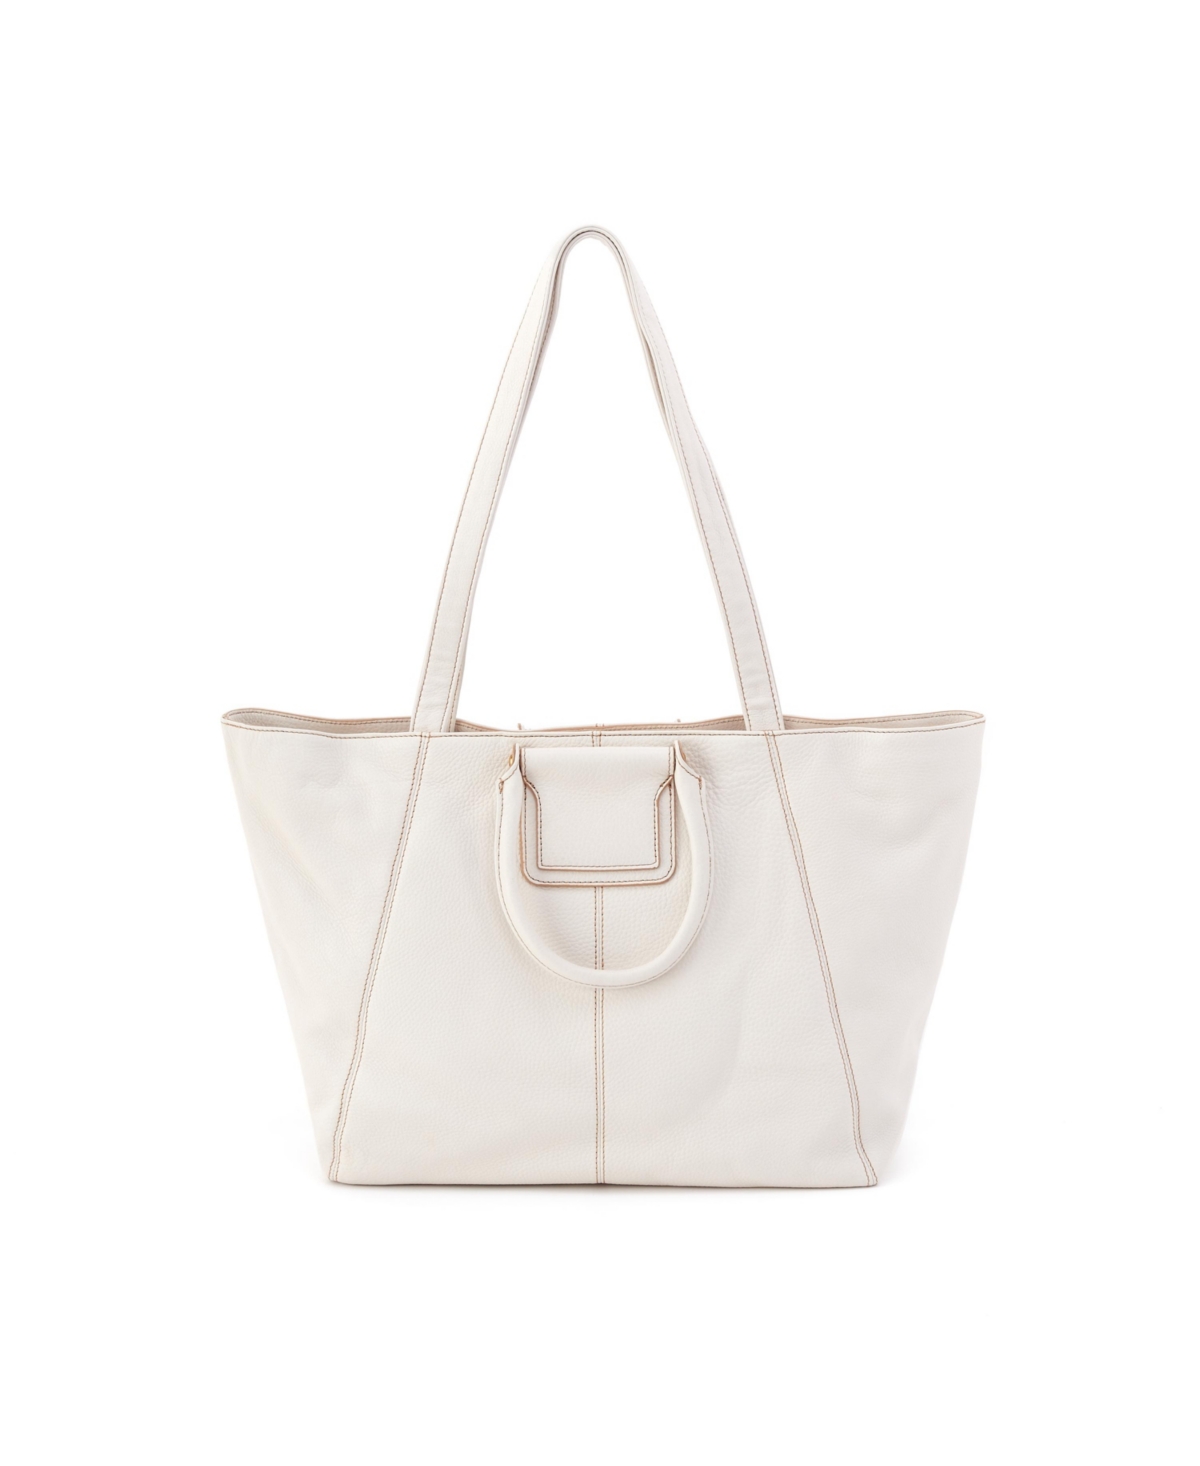 Sheila East/West Tote Bag - White